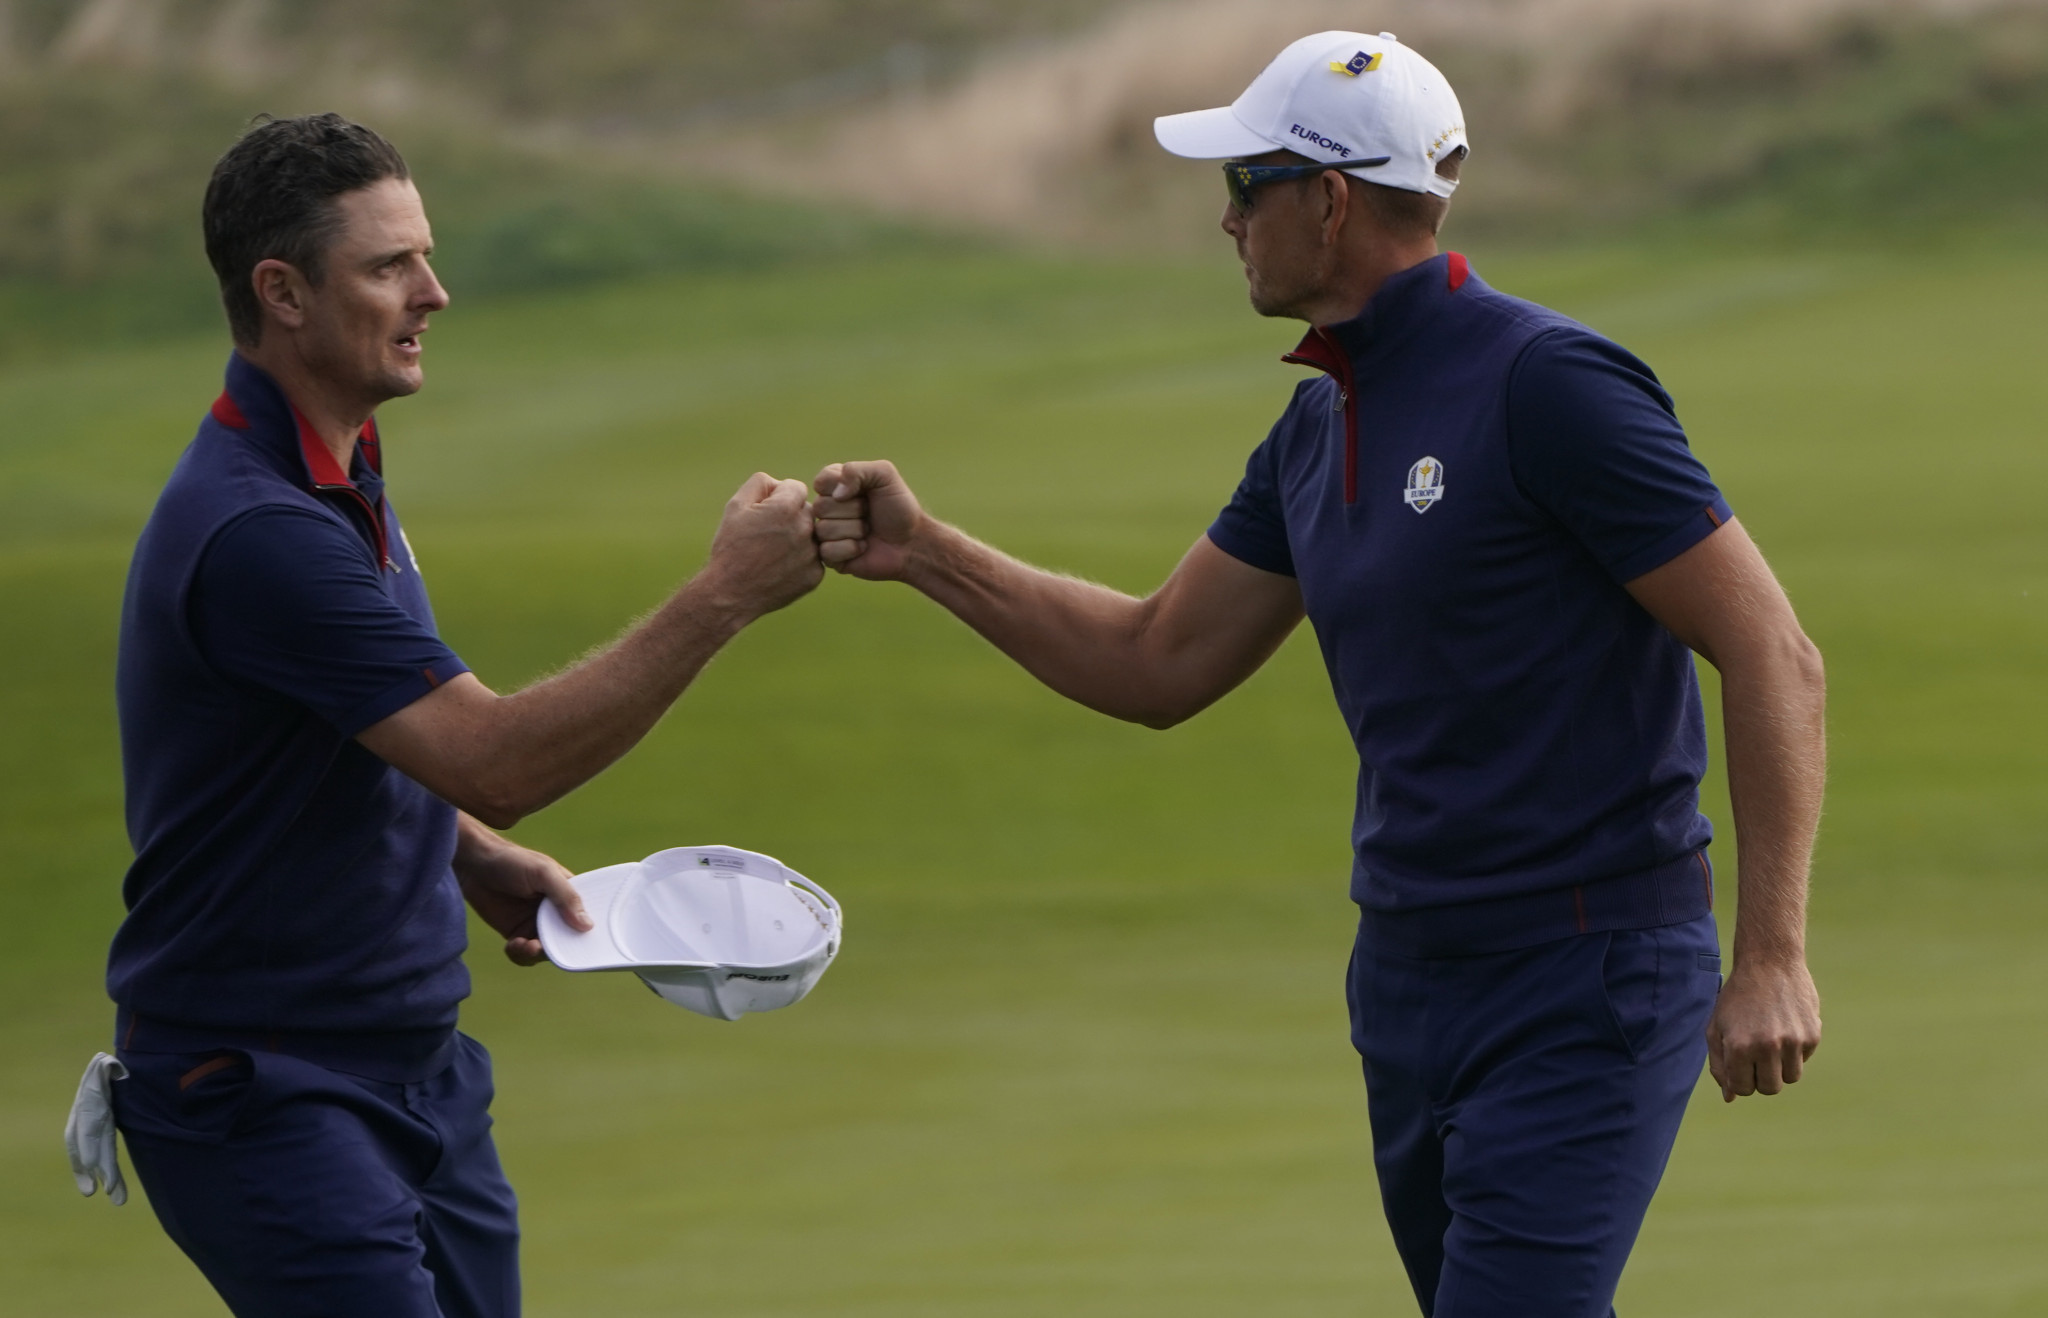 Historic clean sweep in afternoon foursomes gives Europe 5-3 Ryder Cup lead after day one in Paris